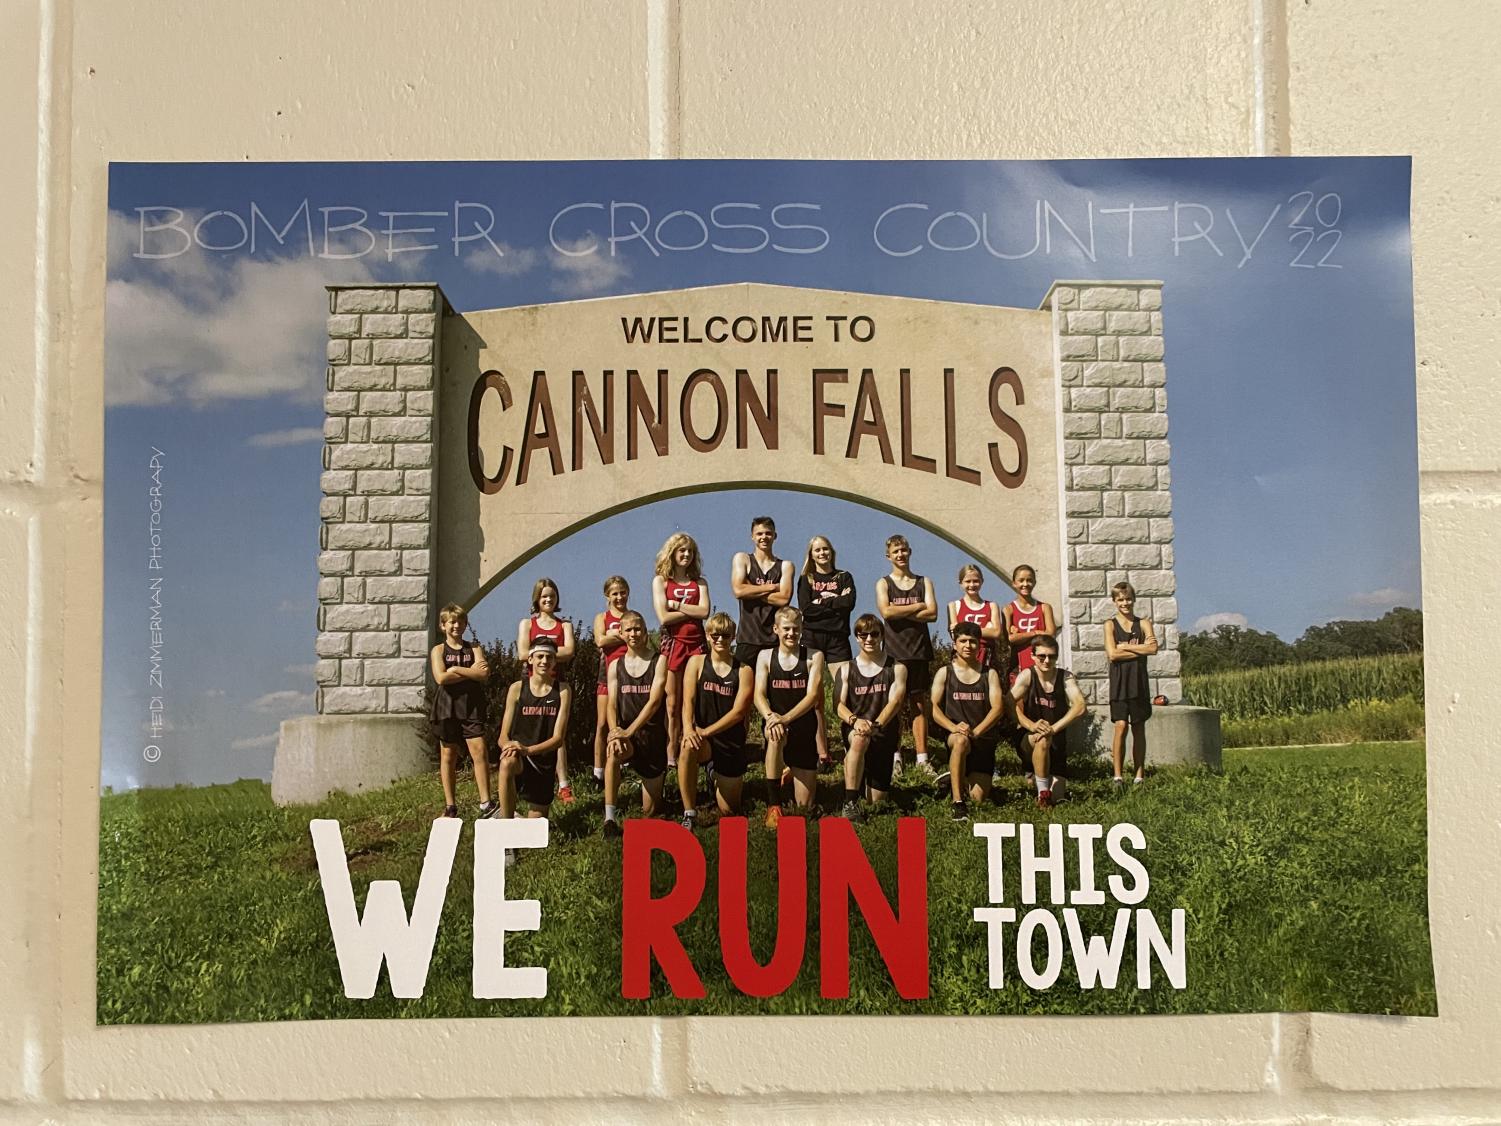 The cross country team poses in front of the Cannon Falls welcome sign